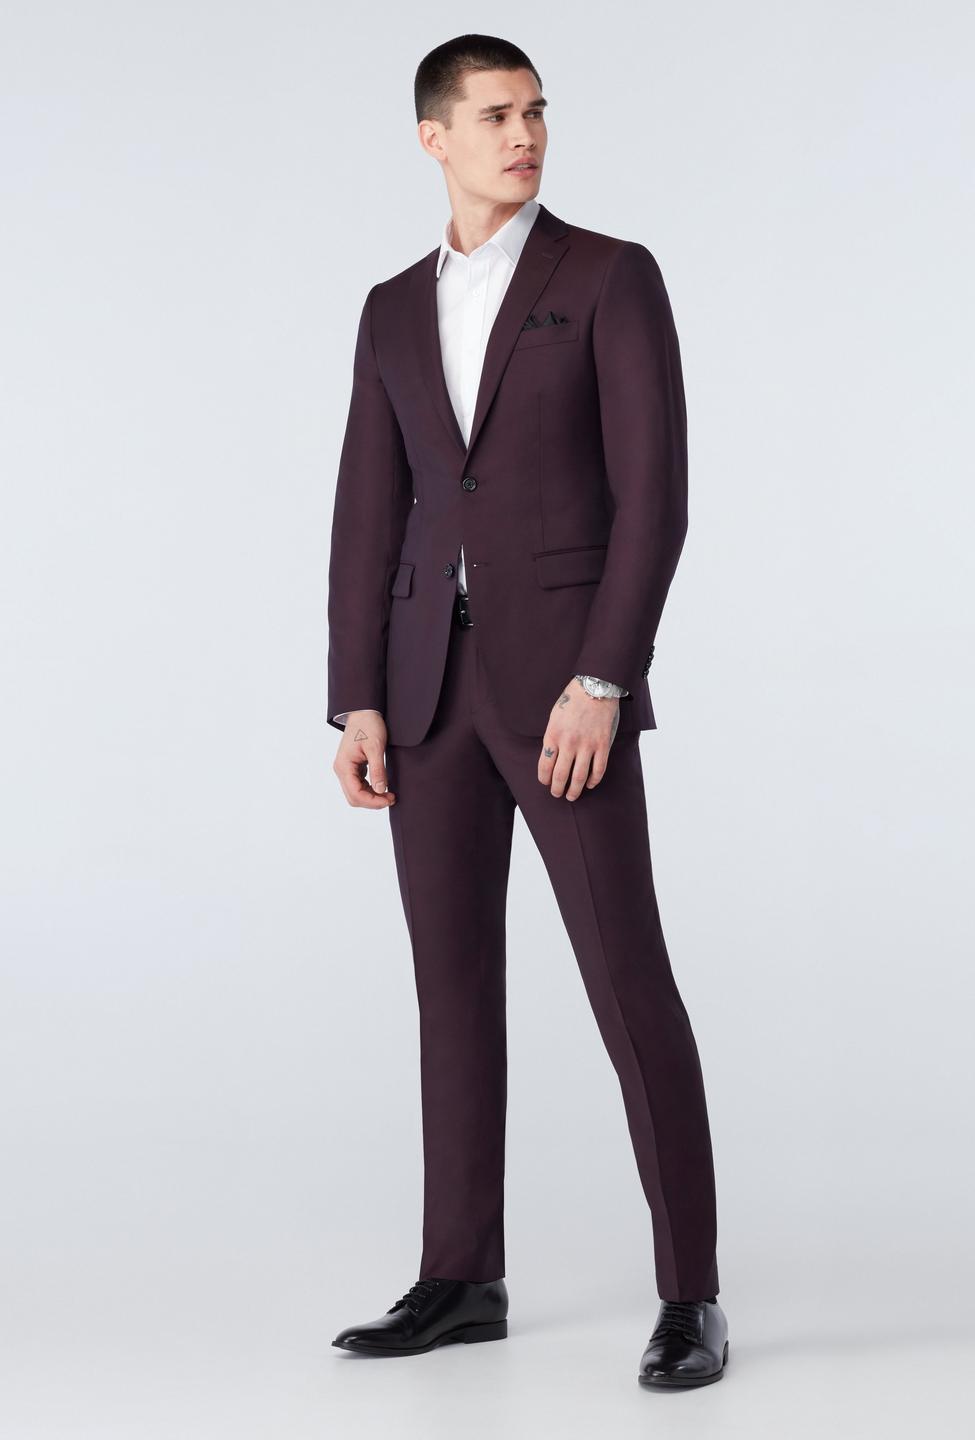 Burgundy suit - Highworth Solid Design from Premium Indochino Collection